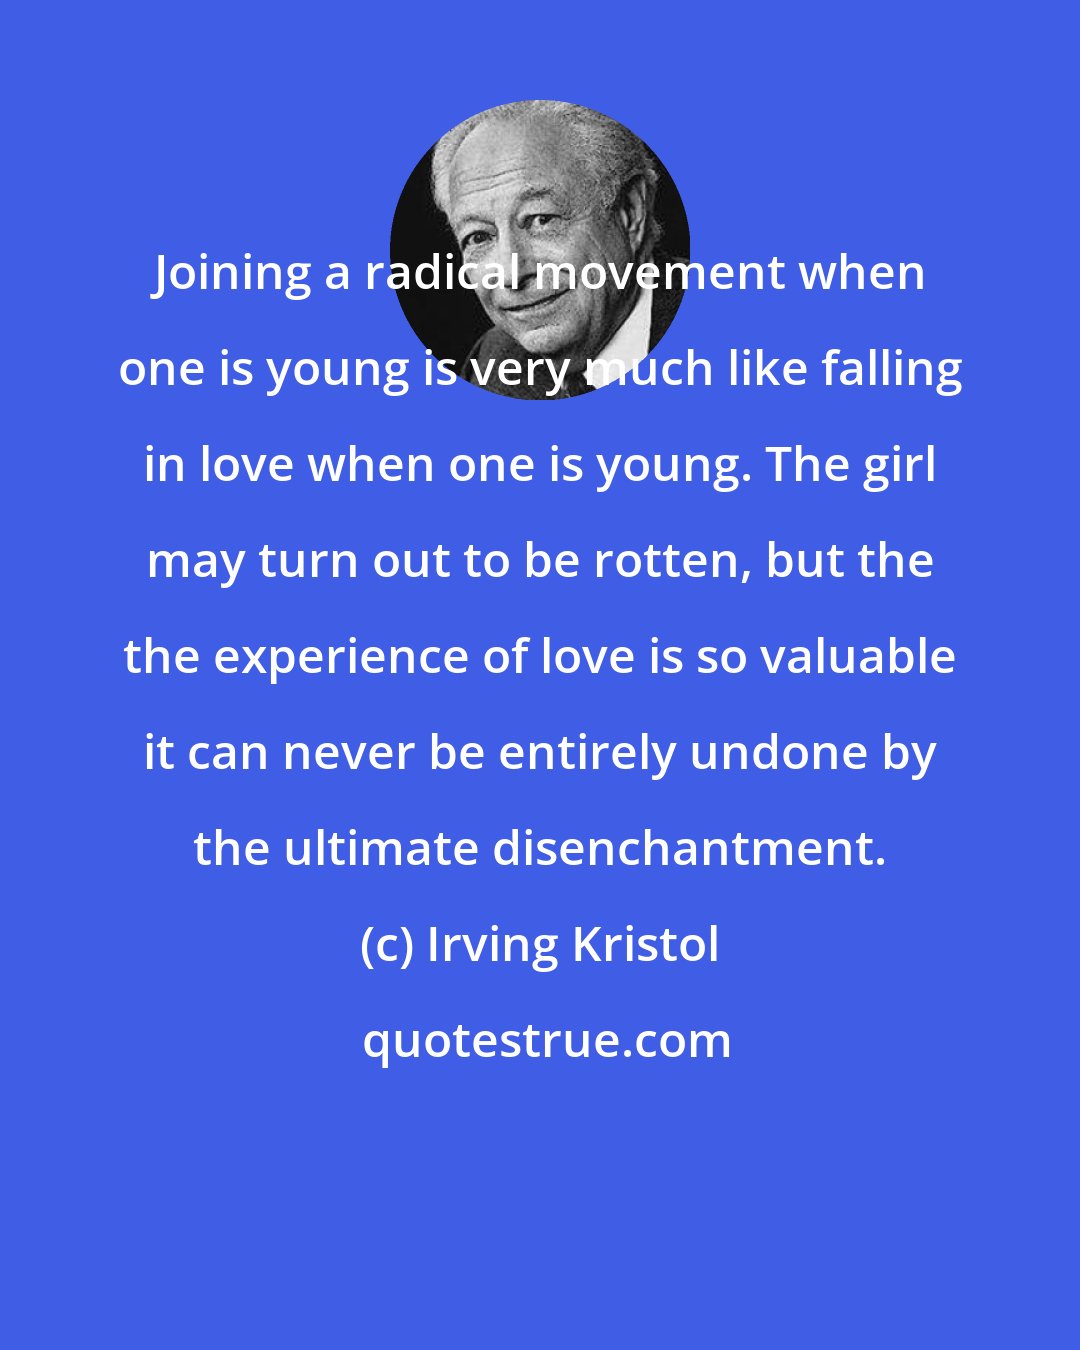 Irving Kristol: Joining a radical movement when one is young is very much like falling in love when one is young. The girl may turn out to be rotten, but the the experience of love is so valuable it can never be entirely undone by the ultimate disenchantment.